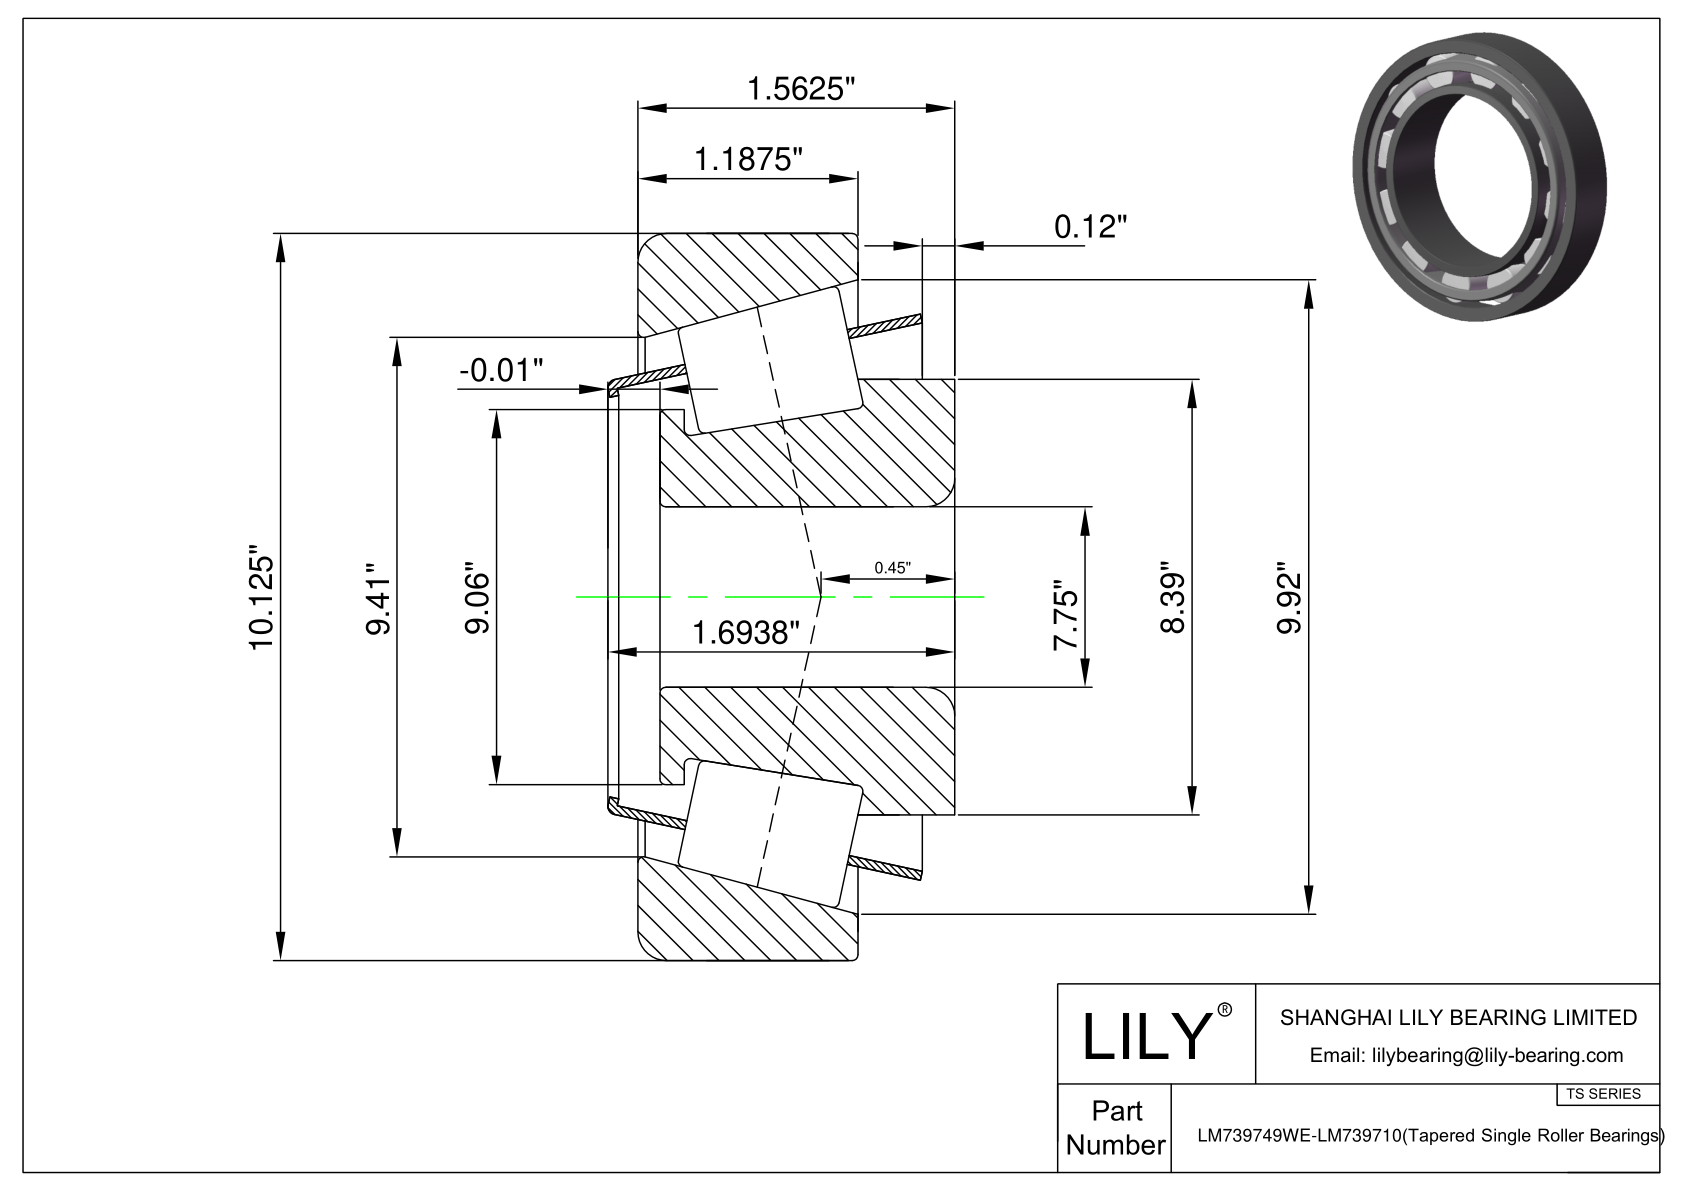 LM739749WE-LM739710 TS (Tapered Single Roller Bearings) (Imperial) cad drawing